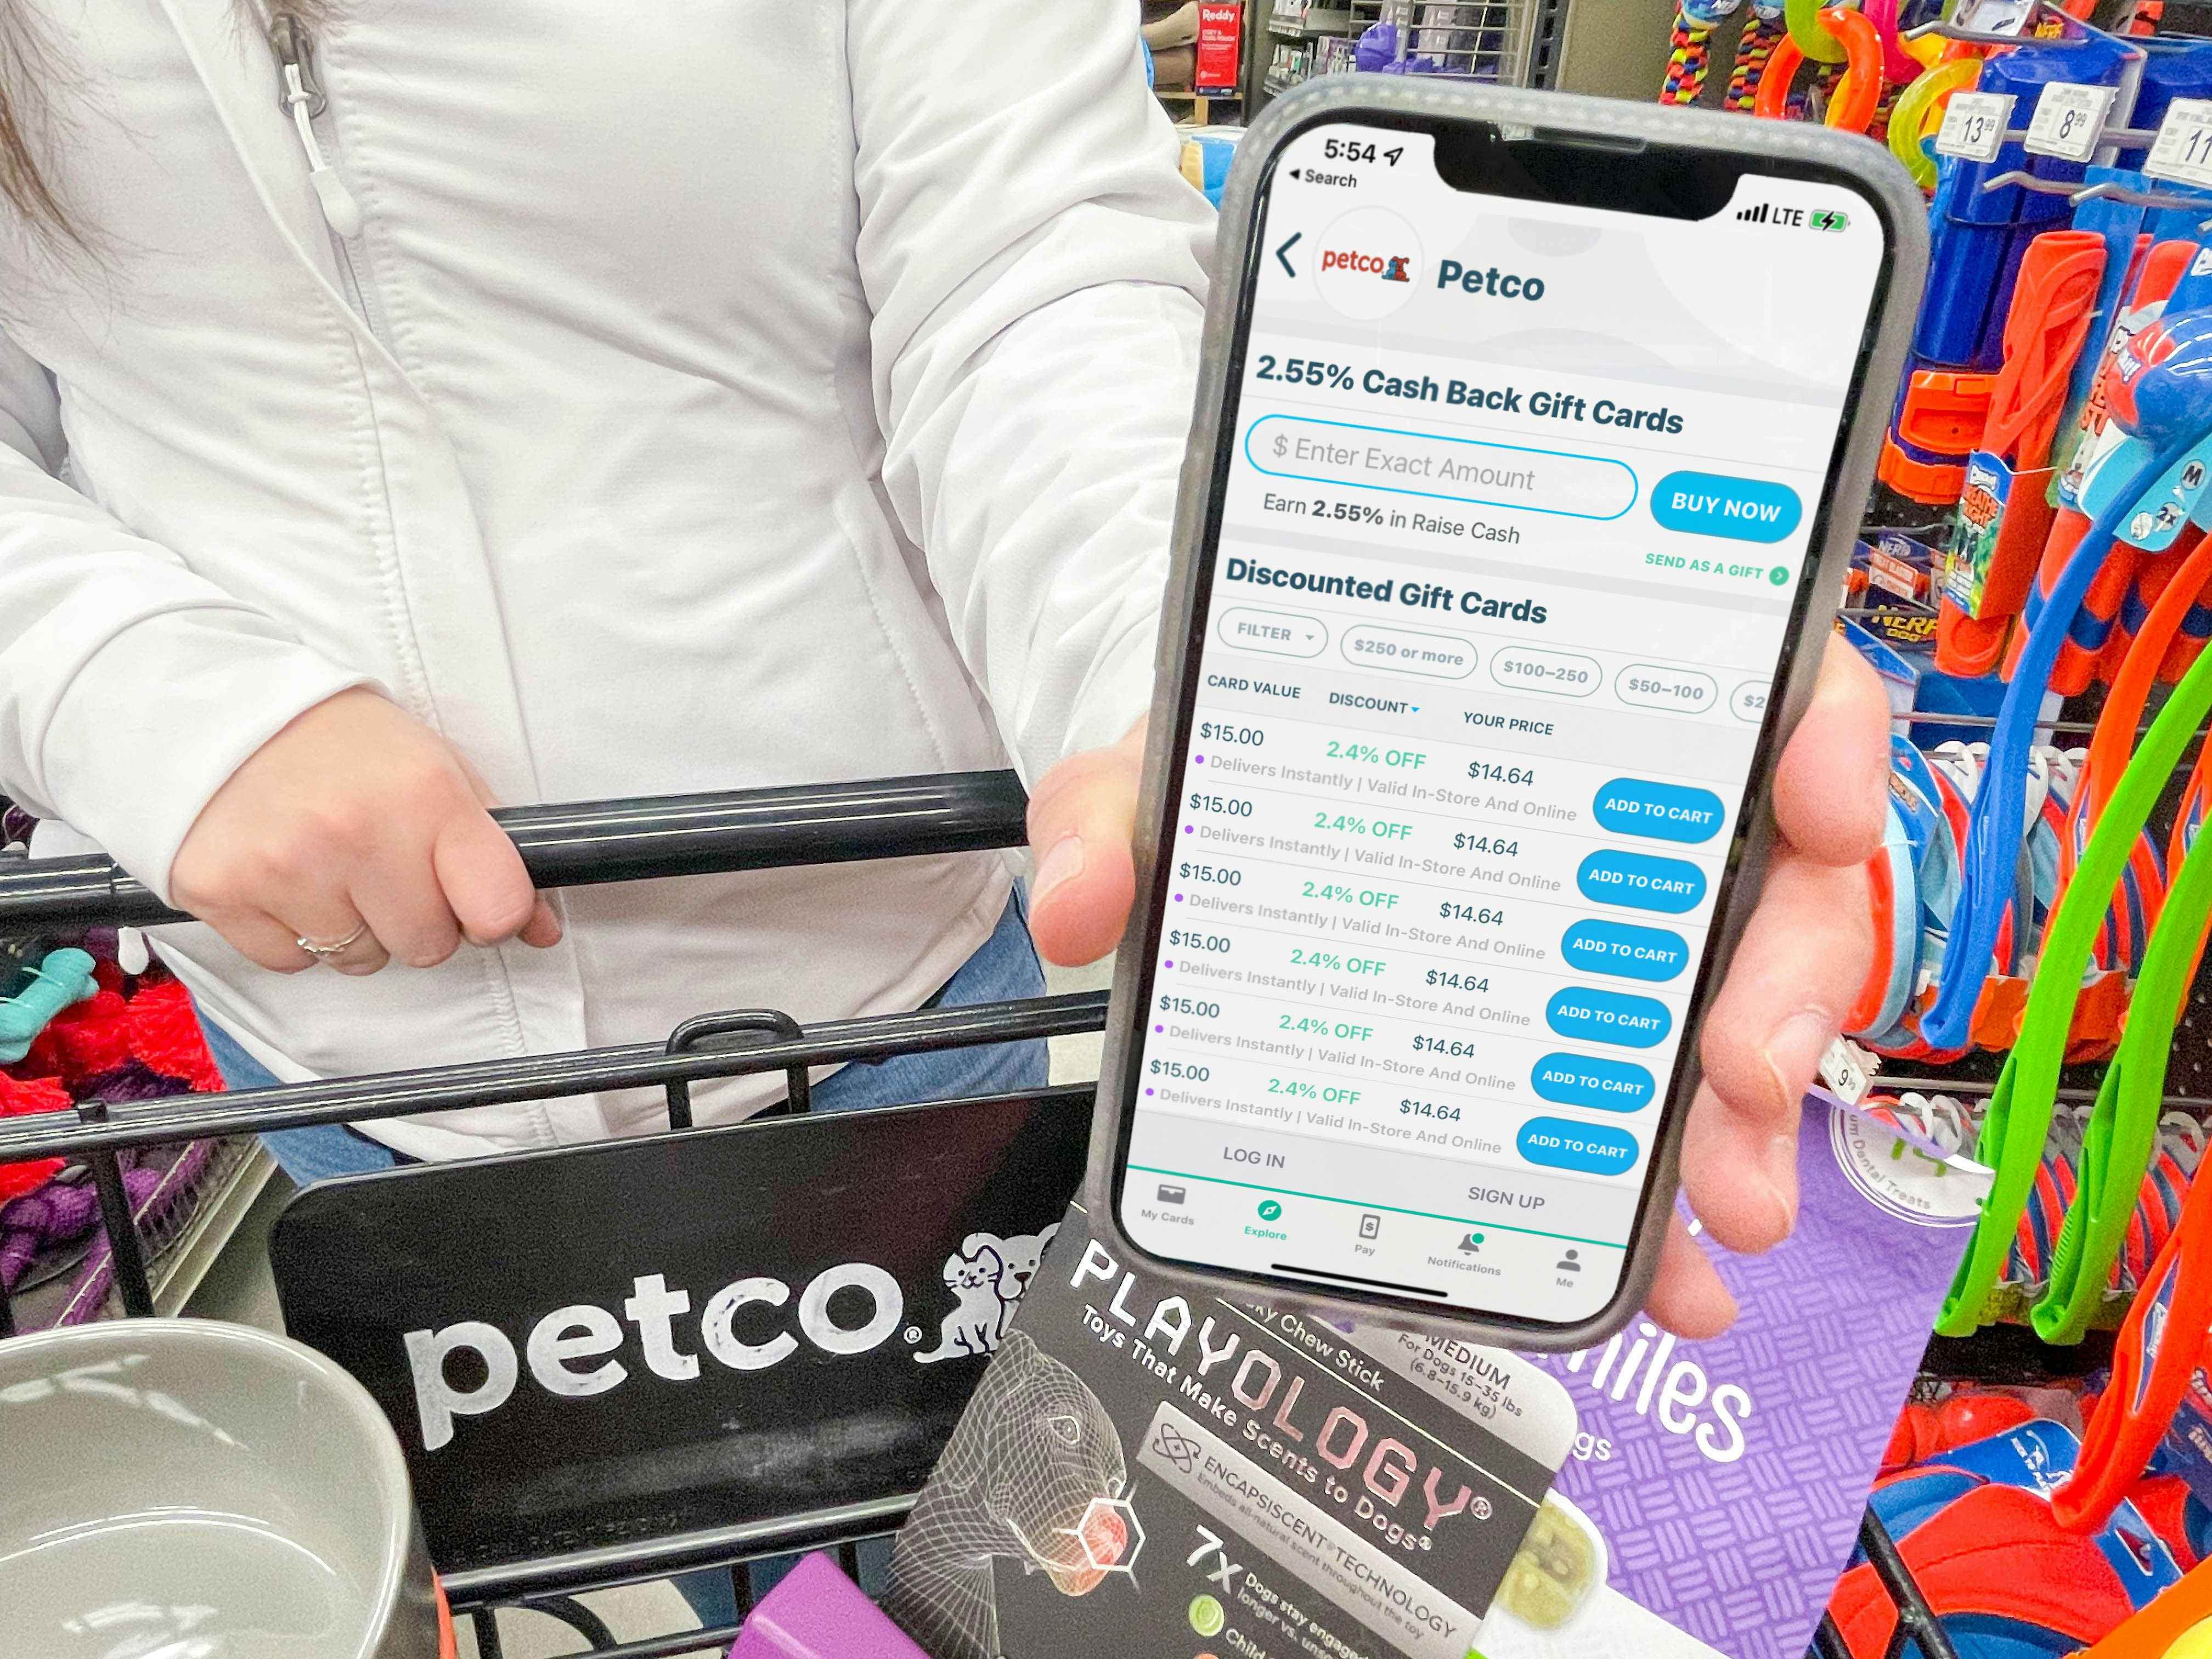 a person holding out a cellphone with raise app and petco gift cards on screen in store by cart